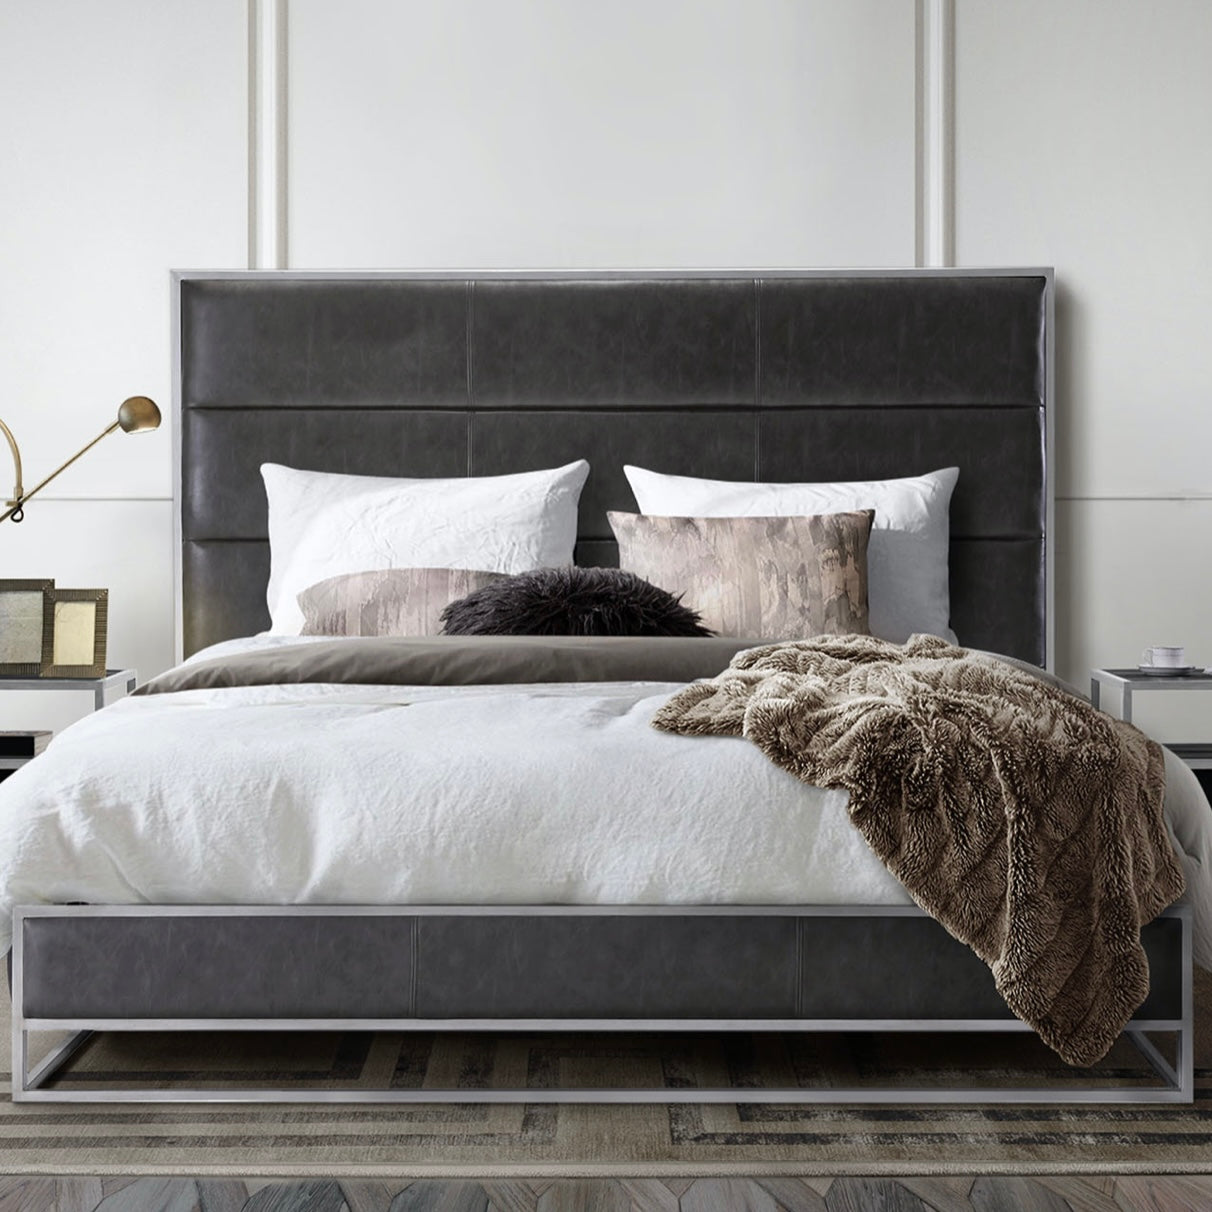 Empire Bed - Weathered Grey/Silver